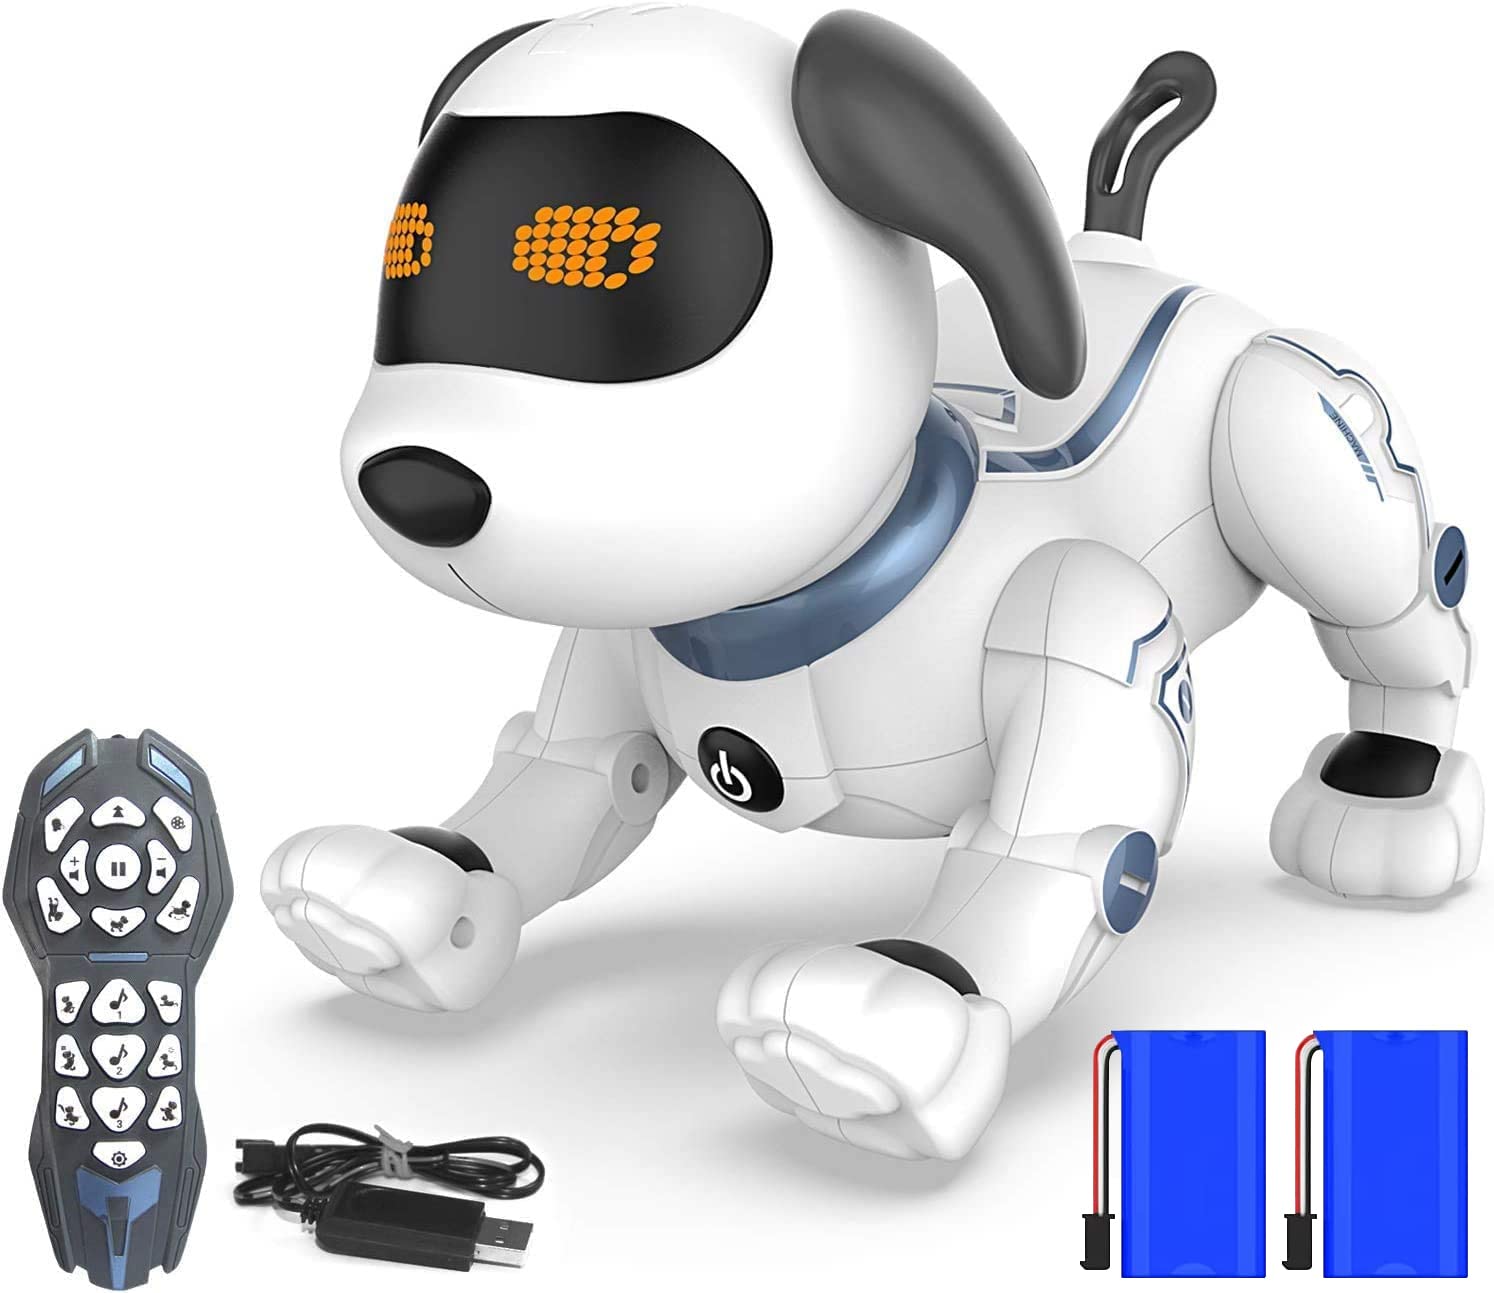 HBUDS Robot Dog Toys for Kids, Remote Control Stunt Programmable Robot Puppy Toy Dog Interactive with Commands Sing, Dance, Bark, Walk Electronic Pet Dog for Boys Girls Gifts (Remote Control)